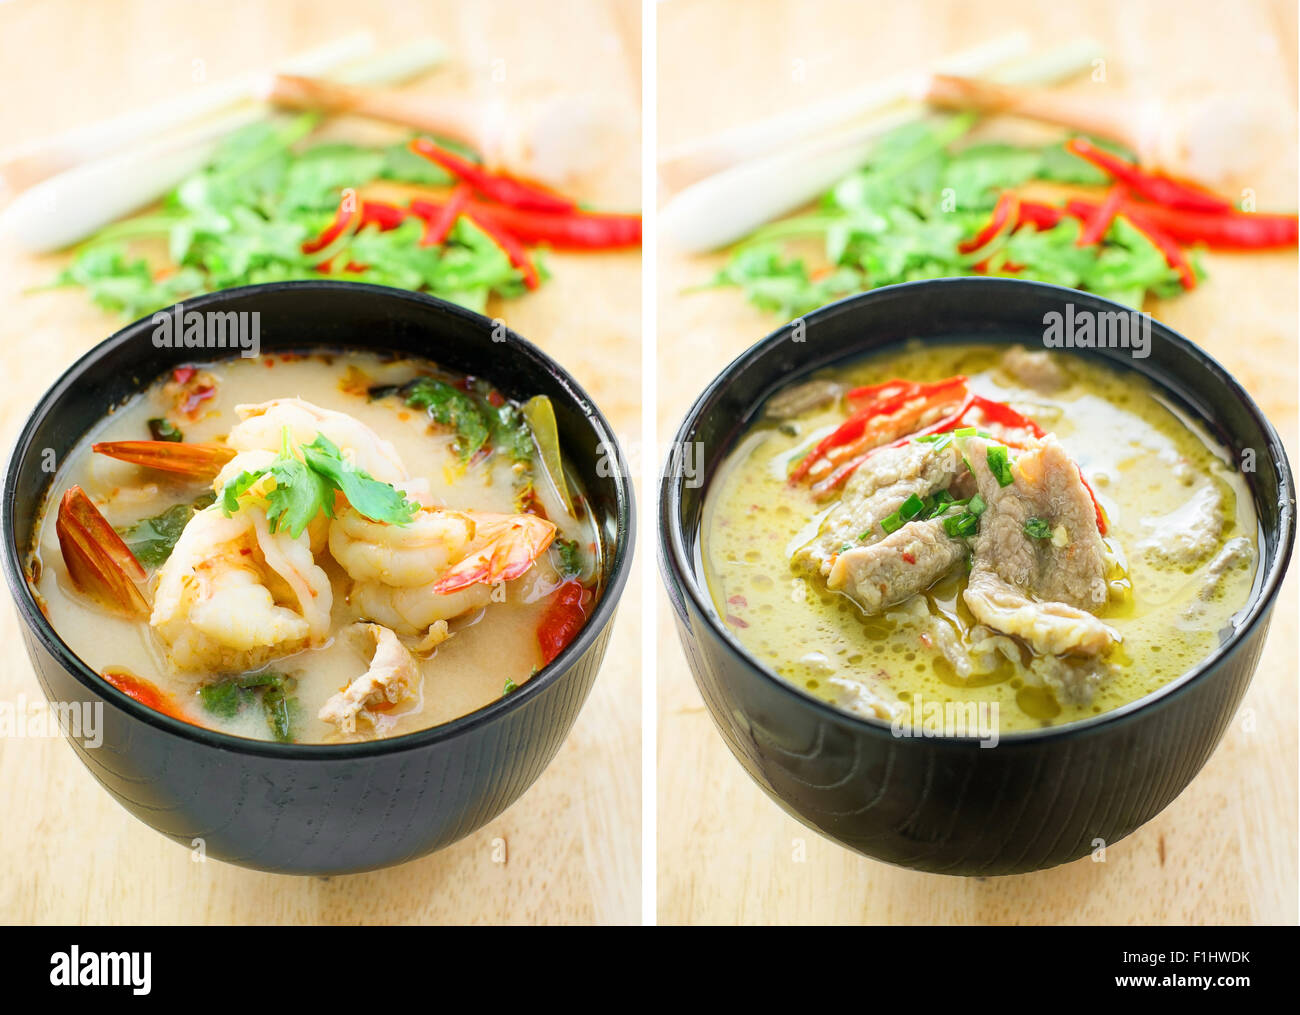 King and Queen of thai food, tom yum kung and green curry pork Stock Photo